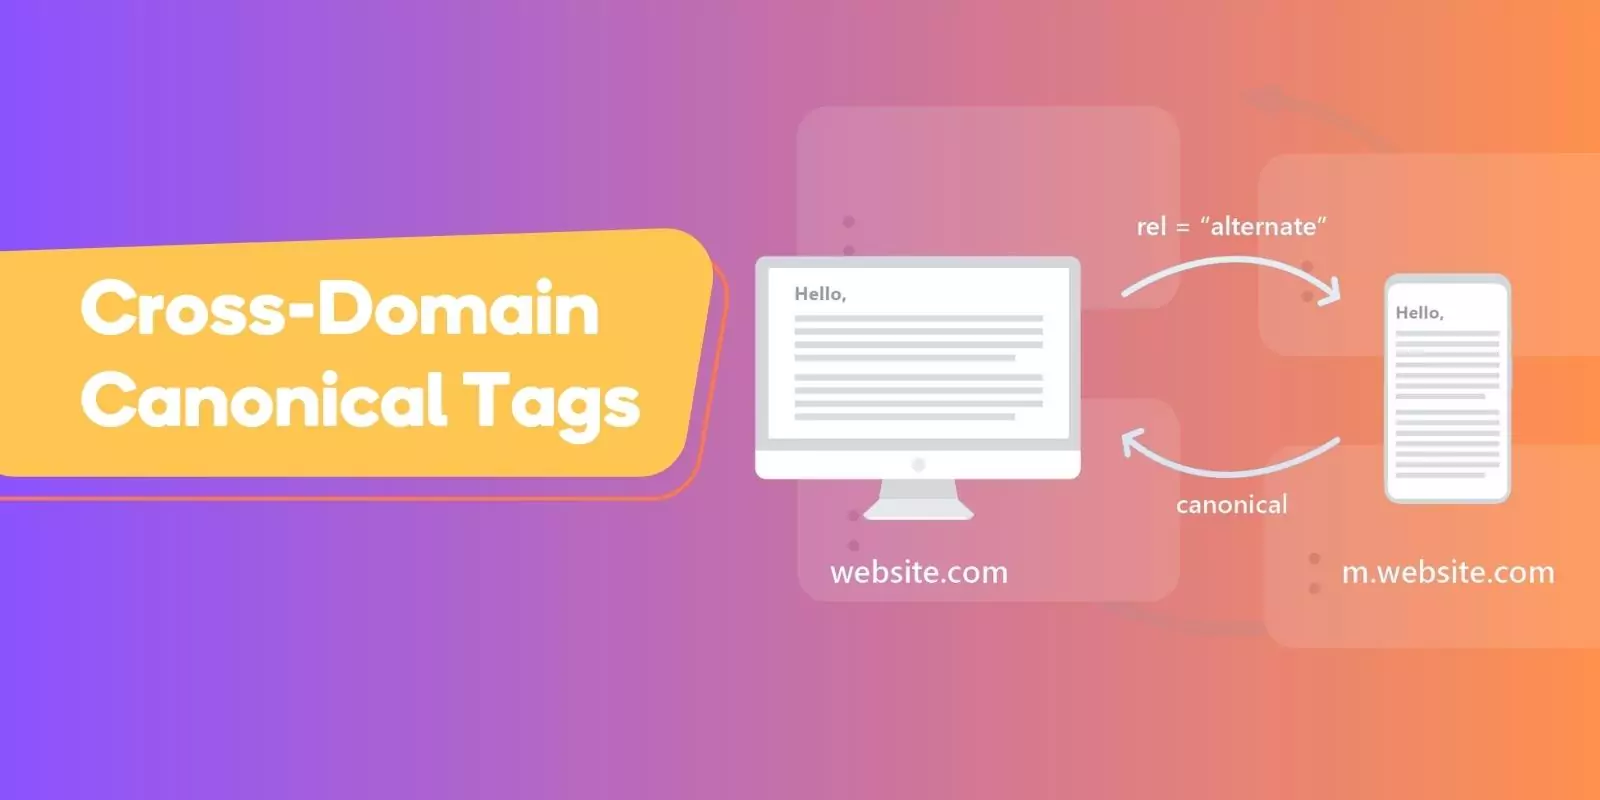 Cross-Domain Canonical Tags